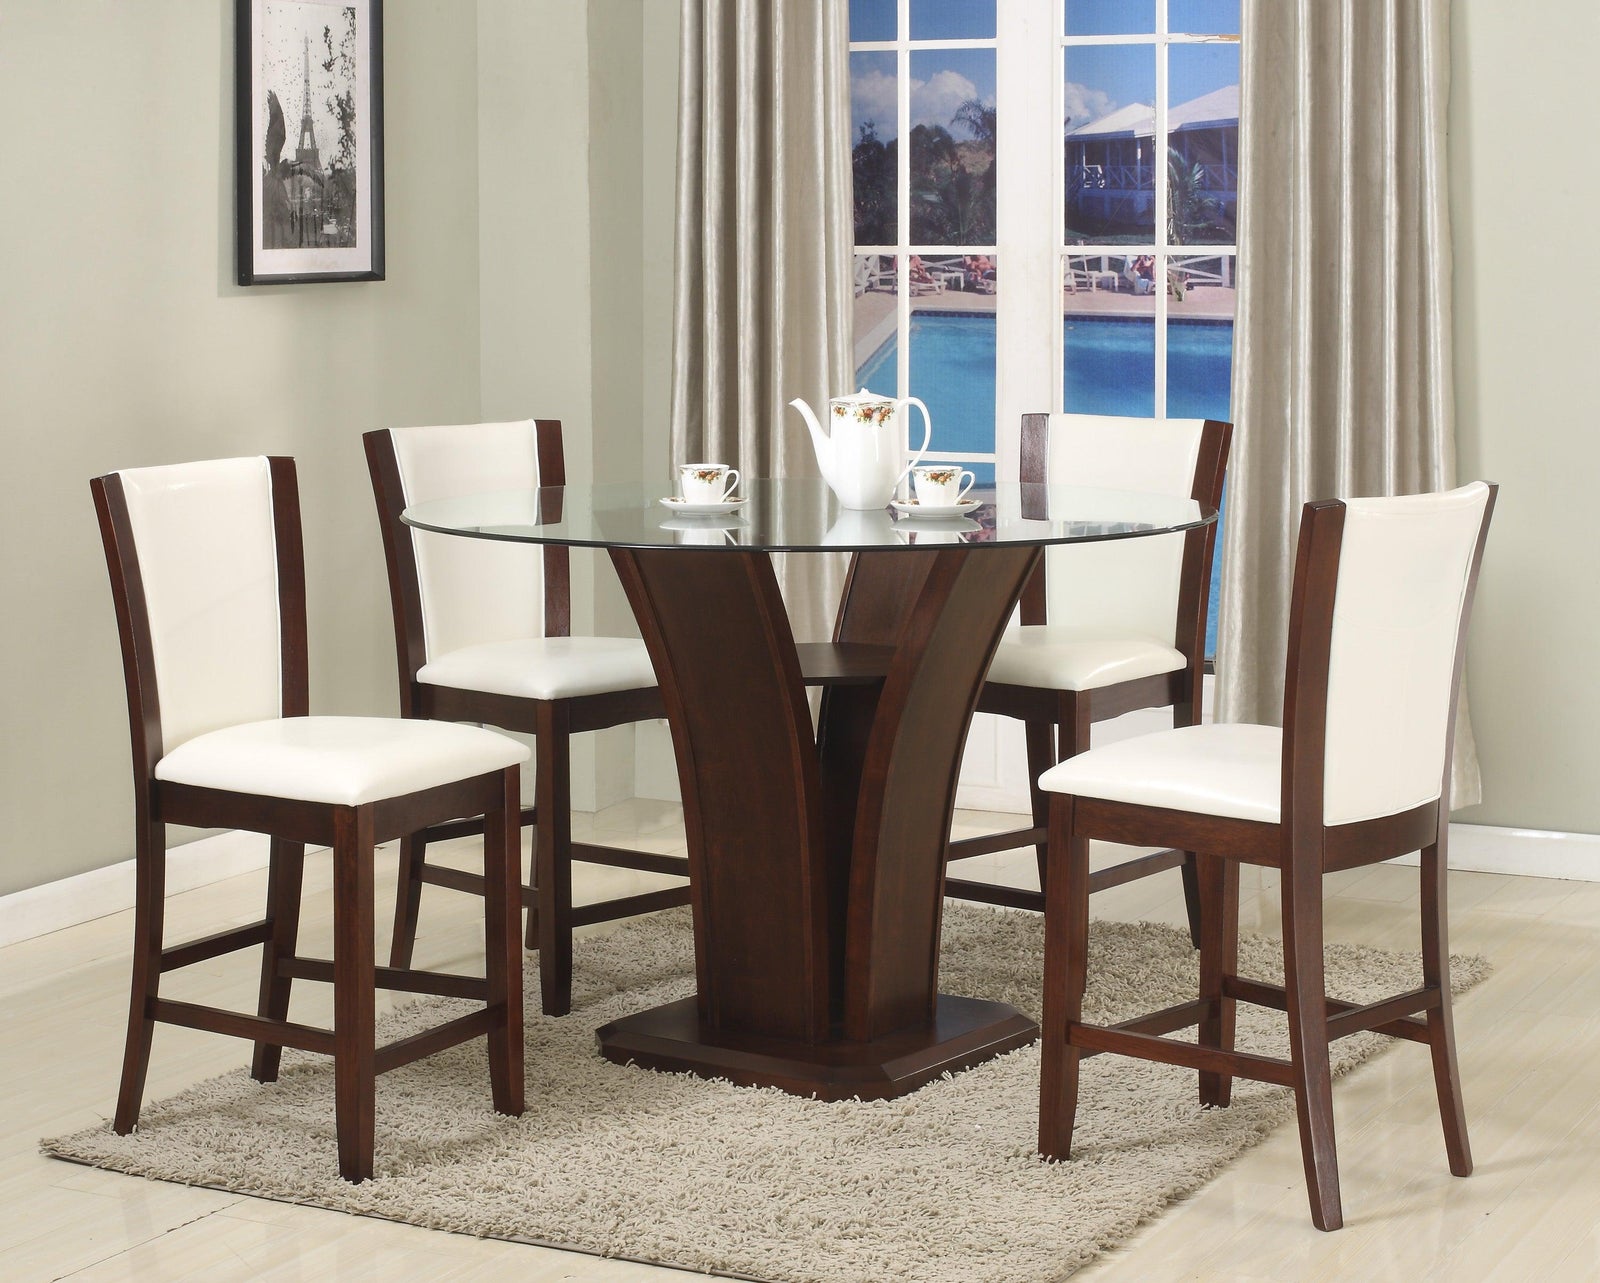 Camelia White/espresso Faux Leather Round Glass-top Counter Height Dining Room Set - Ella Furniture